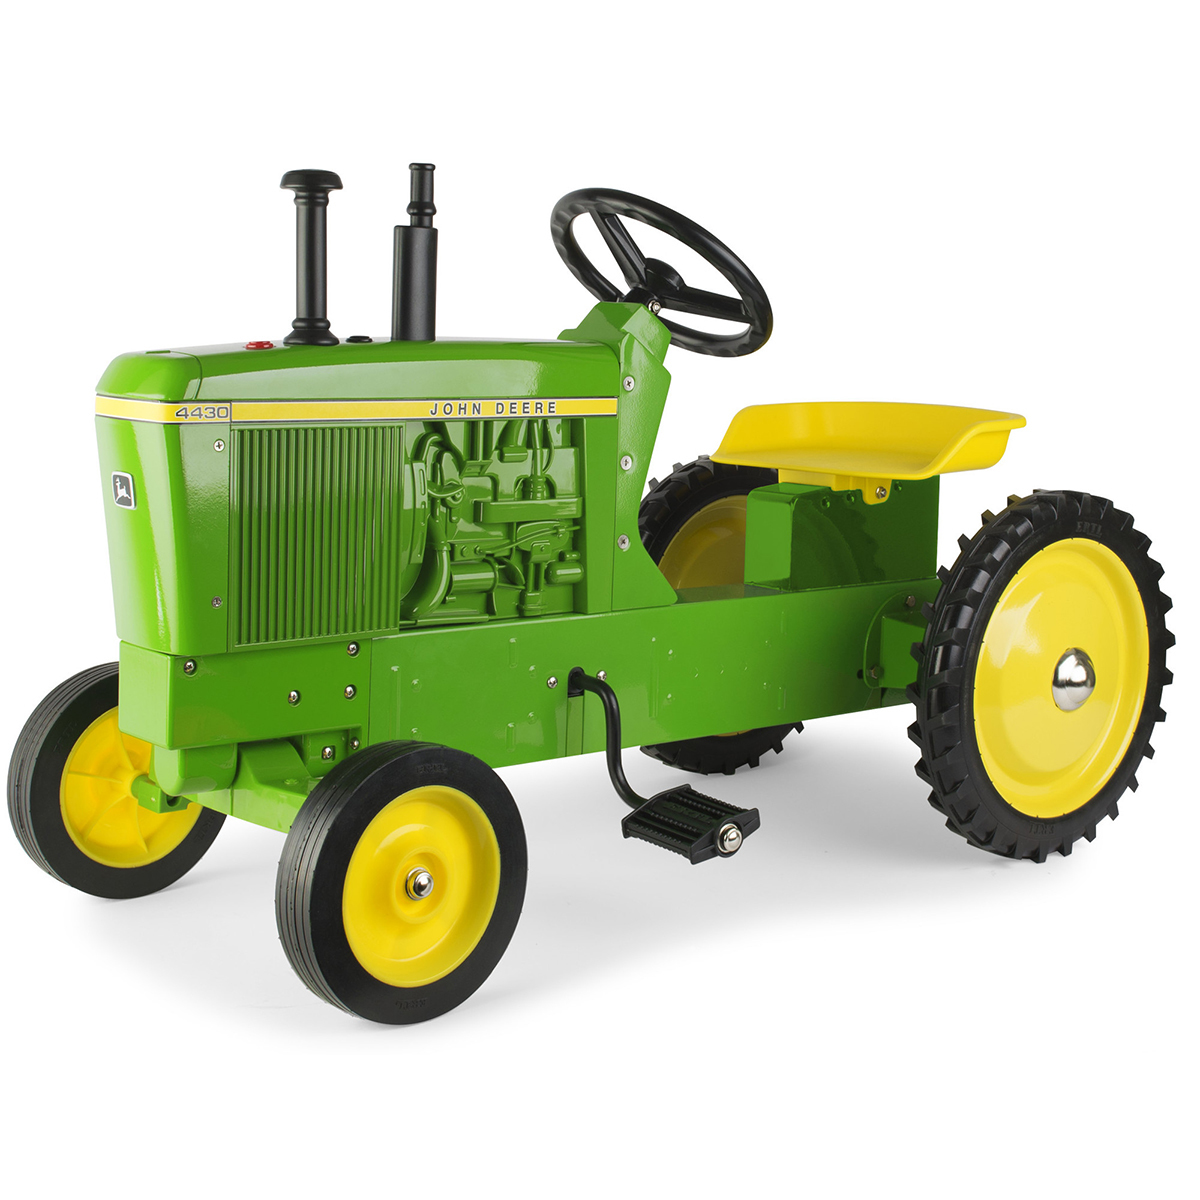 4430 Pedal Tractor Ride Ons Wagons Toy Vehicles Toys John Deere Products Johndeerestore